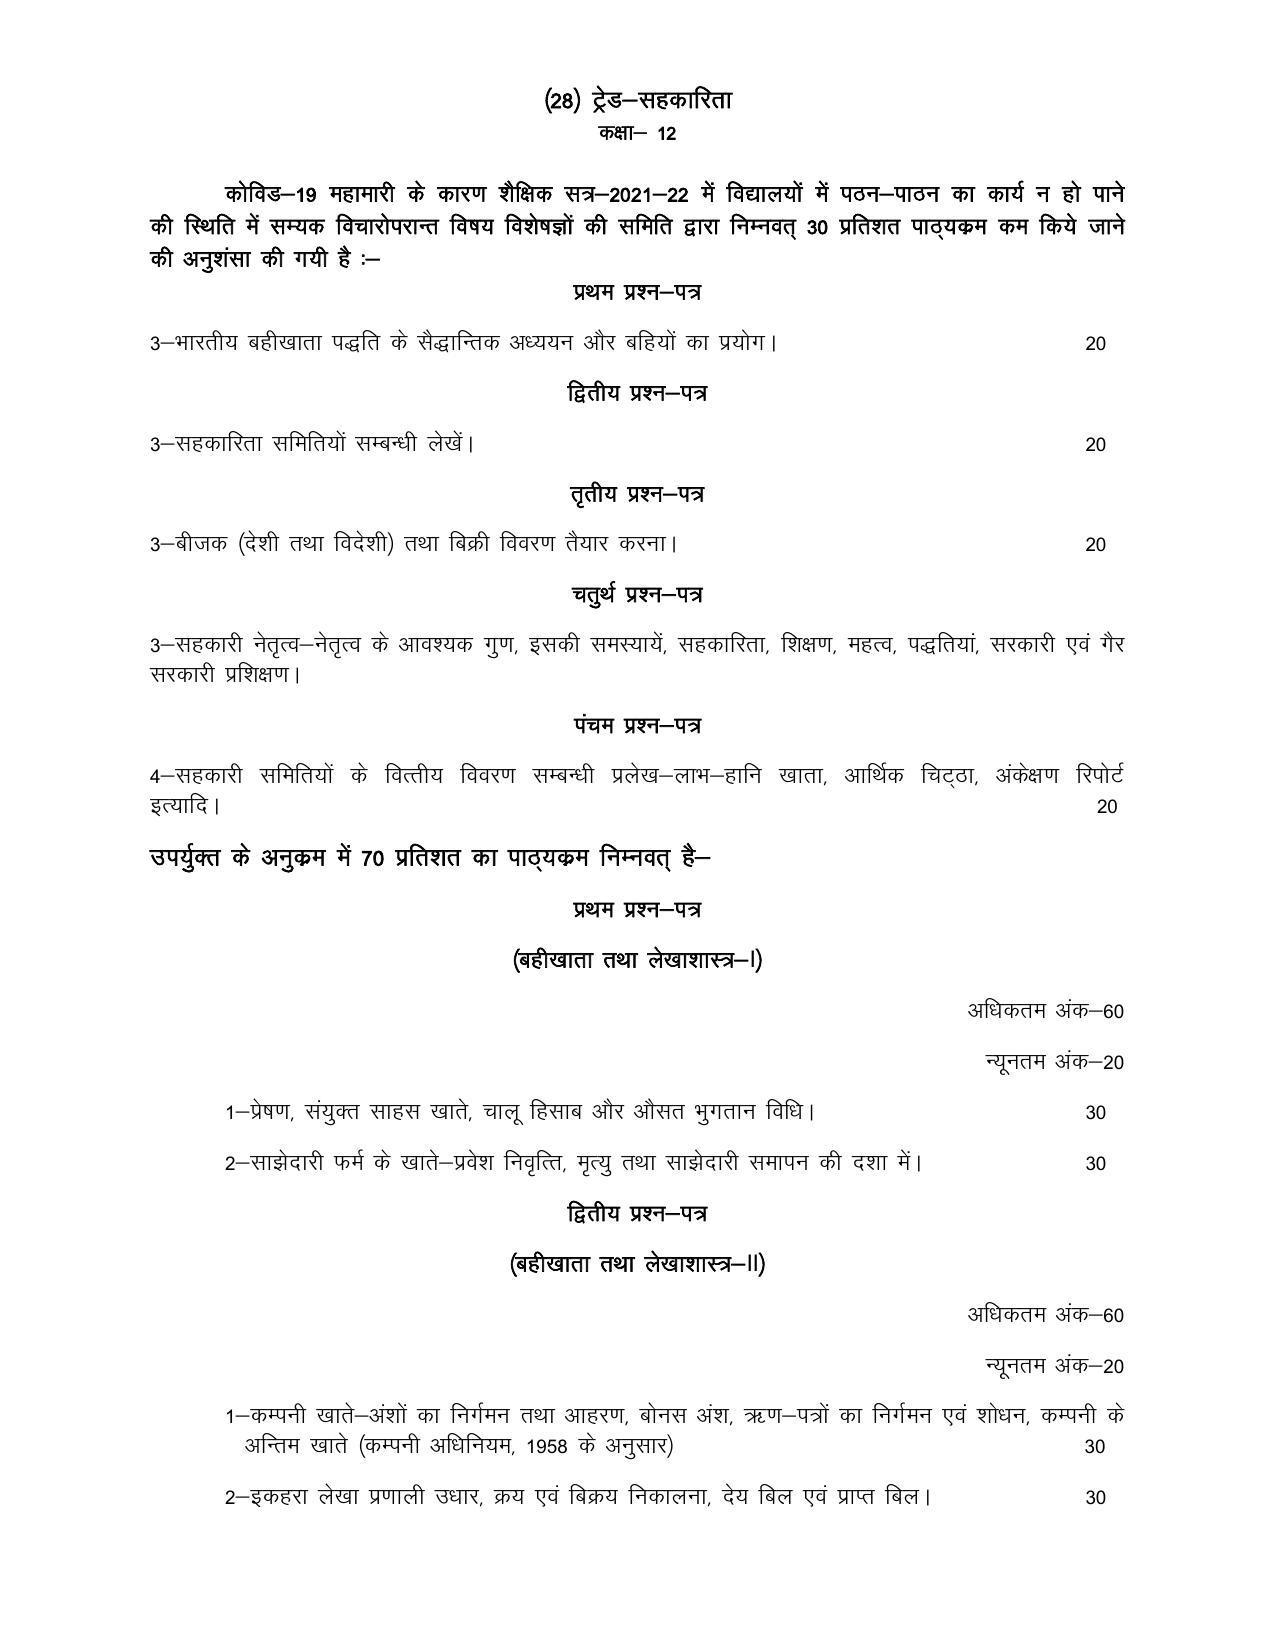 UP Board Class 12- Trade Subjects Syllabus Trade -27 Cooperative - Page 1